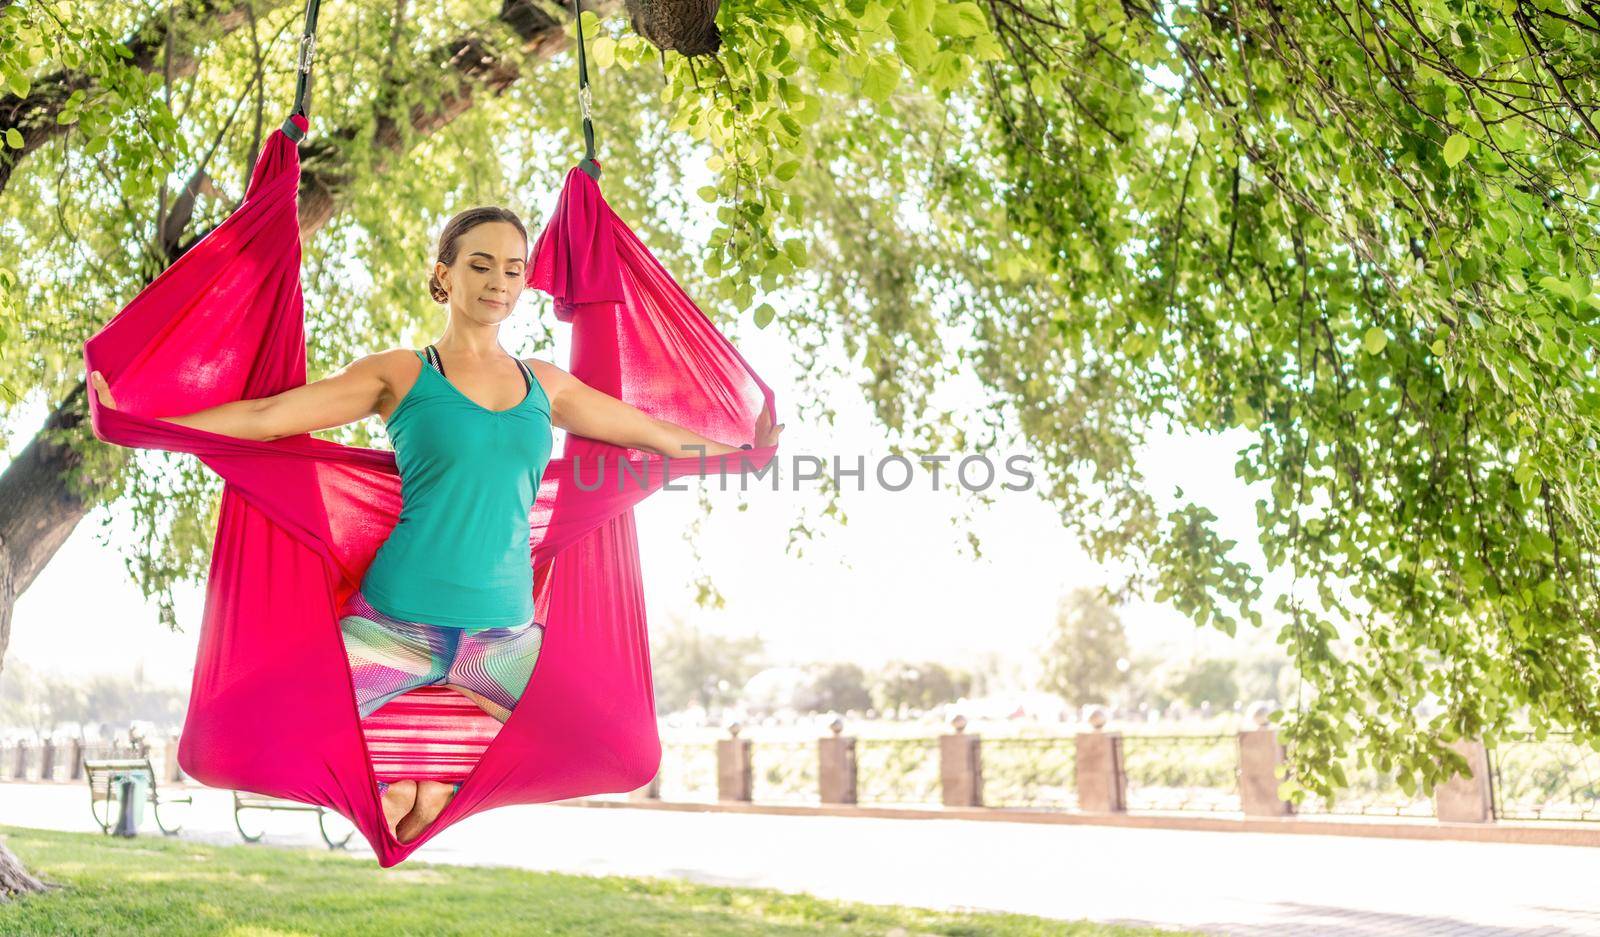 Sport girl doing fly yoga in hammock at nature keeping body in the air. Athlete woman during aero stretching gymnastics outdoors in summer